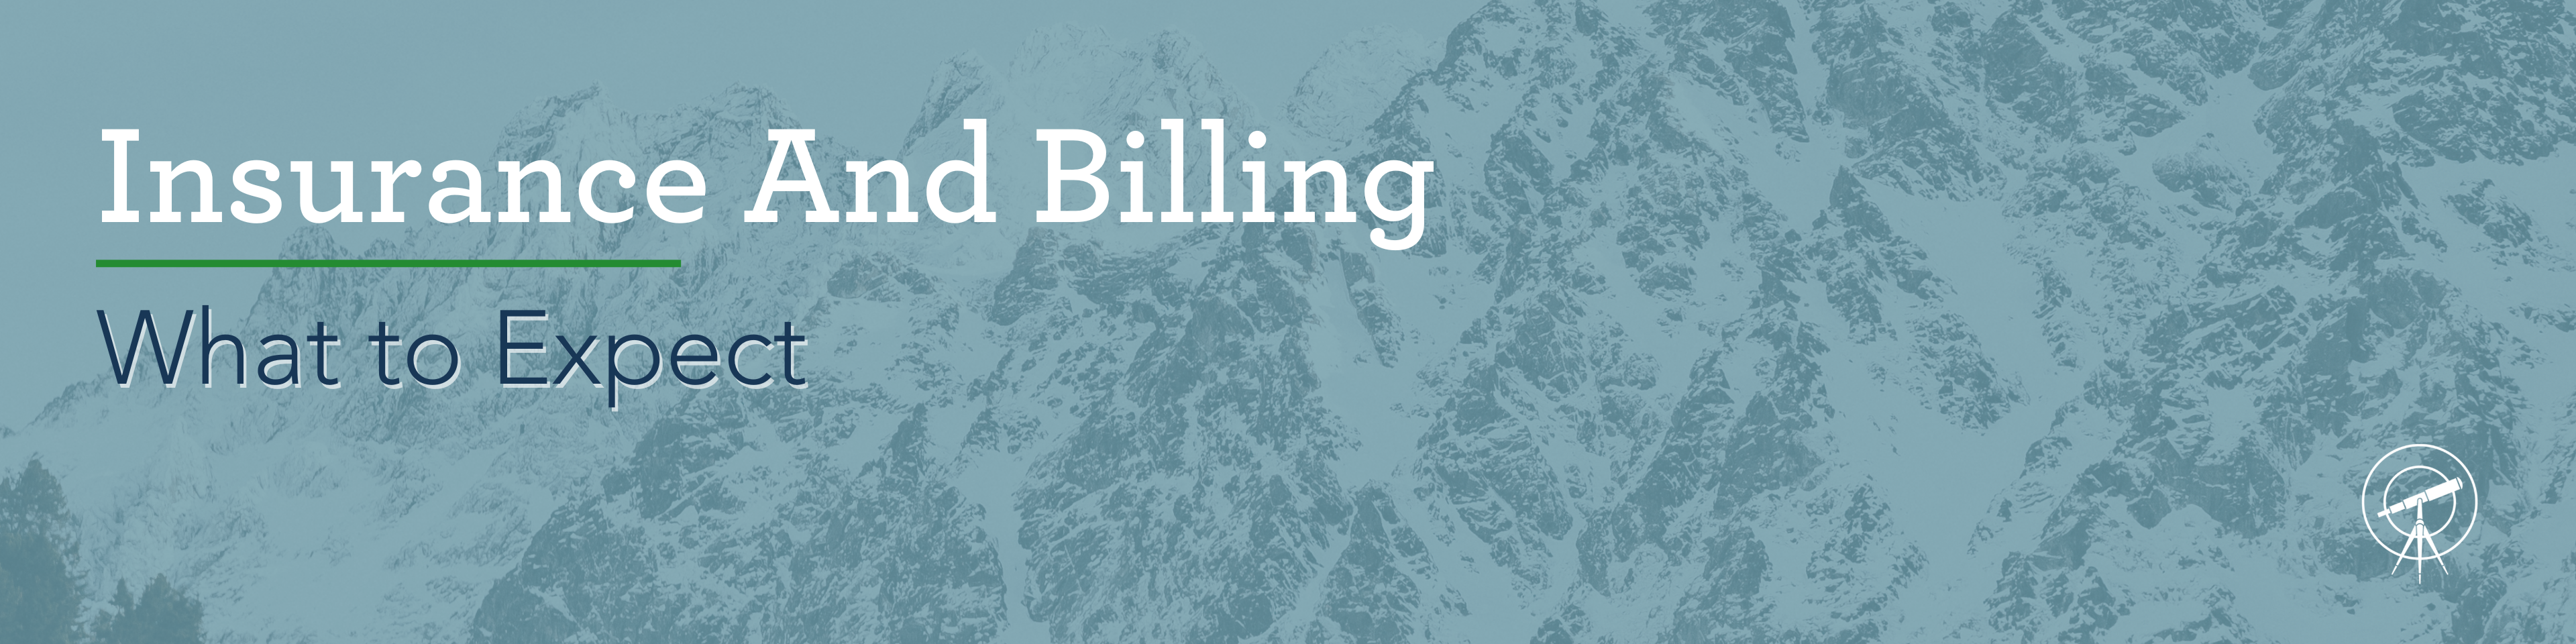 Insurance and Billing, What to Expect